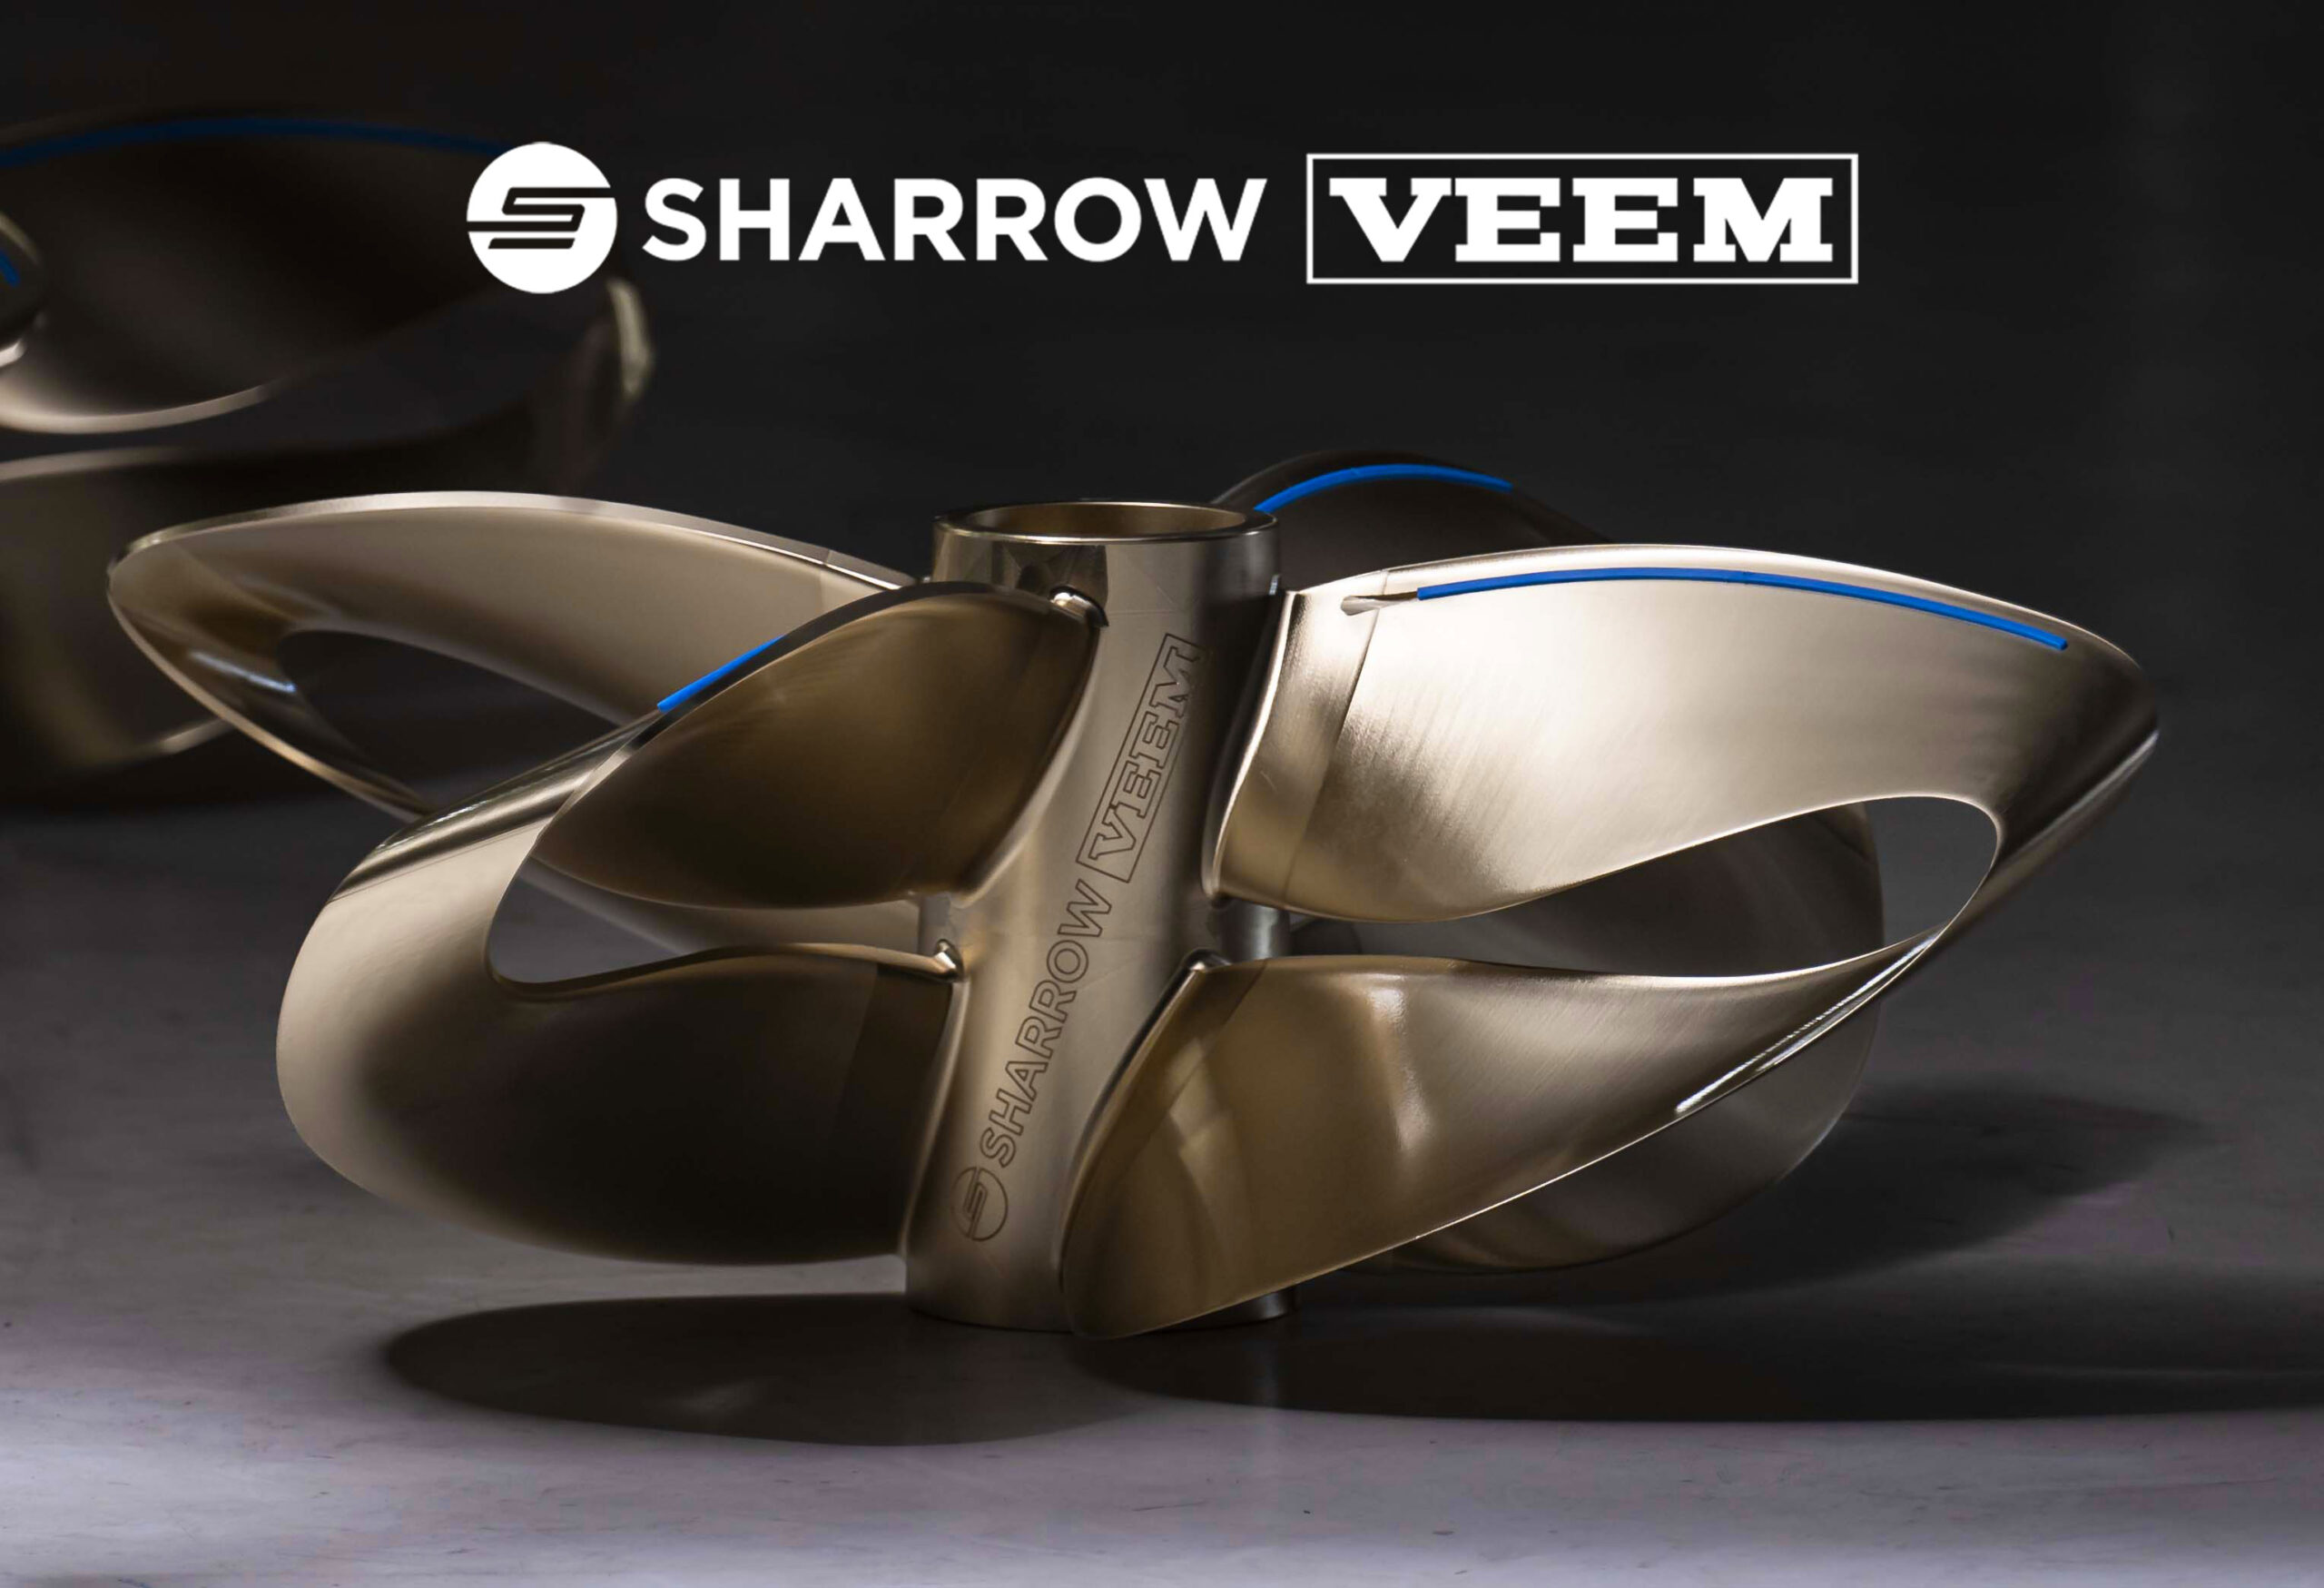 Exclusive agreement signed with Sharrow for VEEM to commercialise revolutionary new propeller design